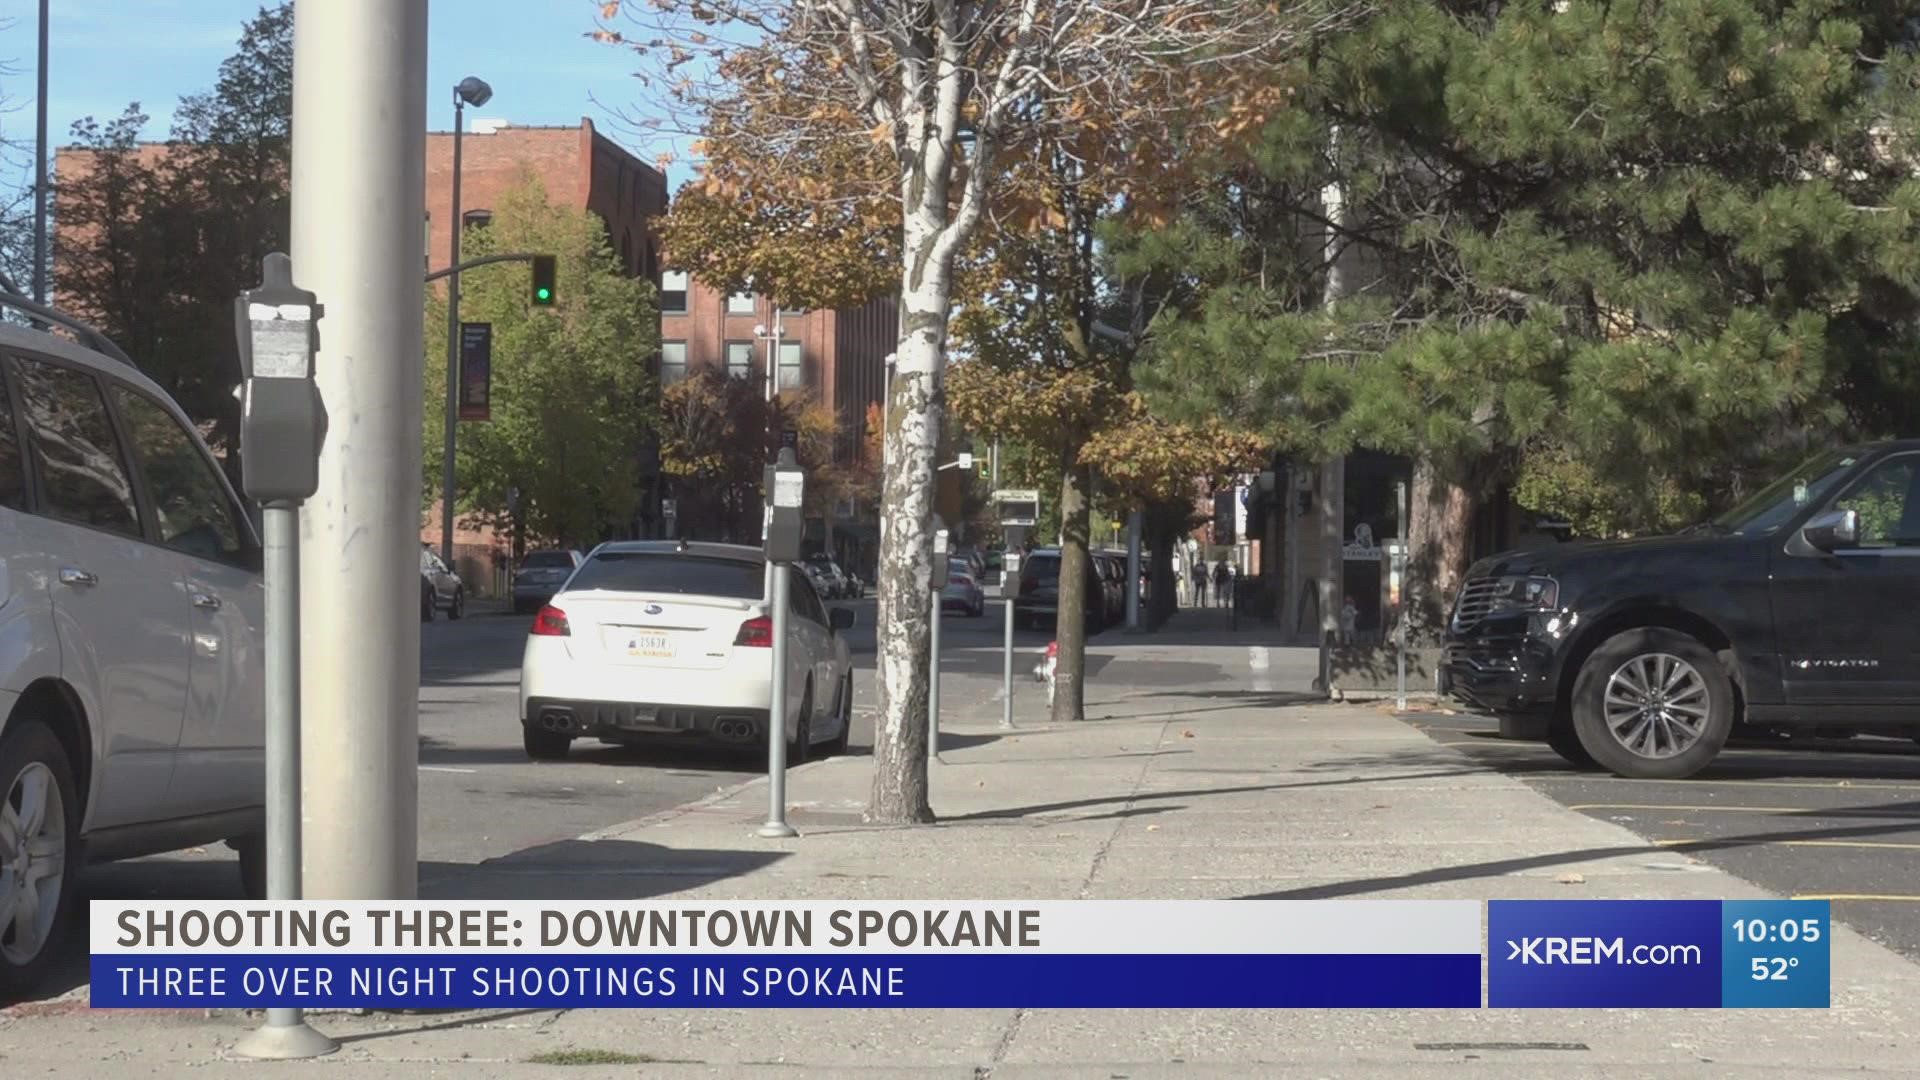 The incidents occurred Friday night and early Saturday morning, including a fatal shooting in downtown Spokane.